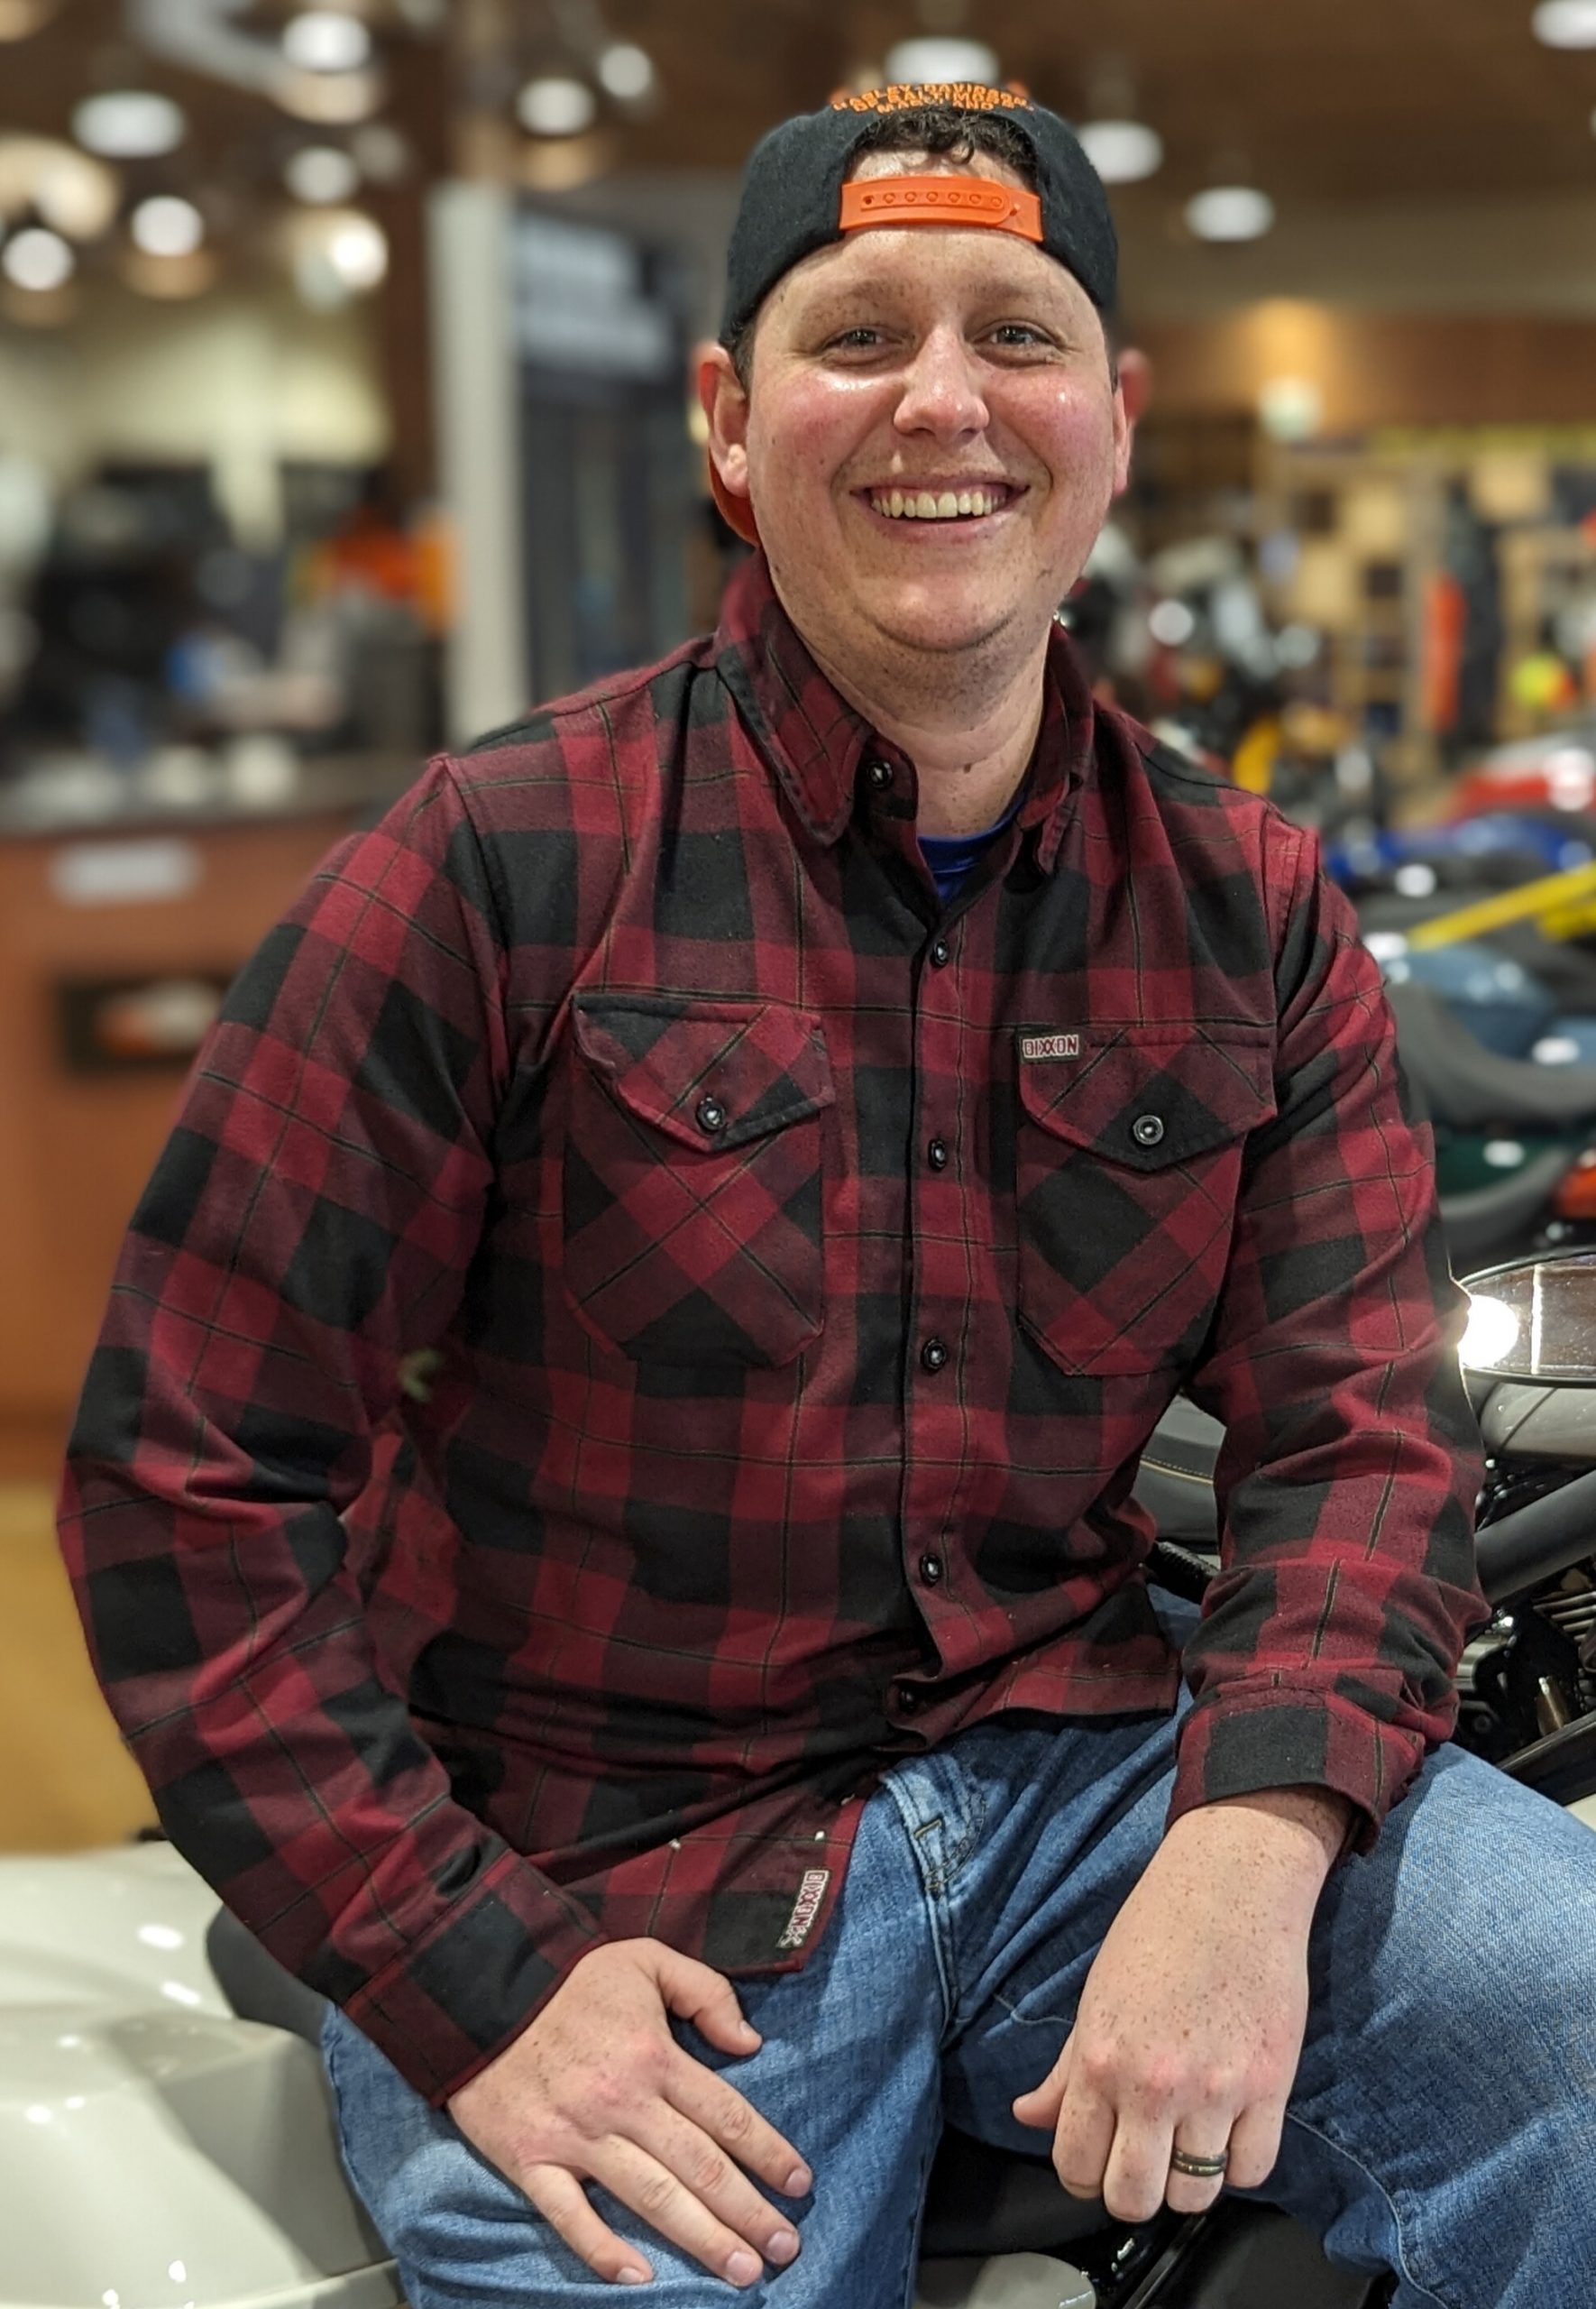 Meet the Staff of Baltimore HD | Your Local Harley-Davidson Dealer Staff